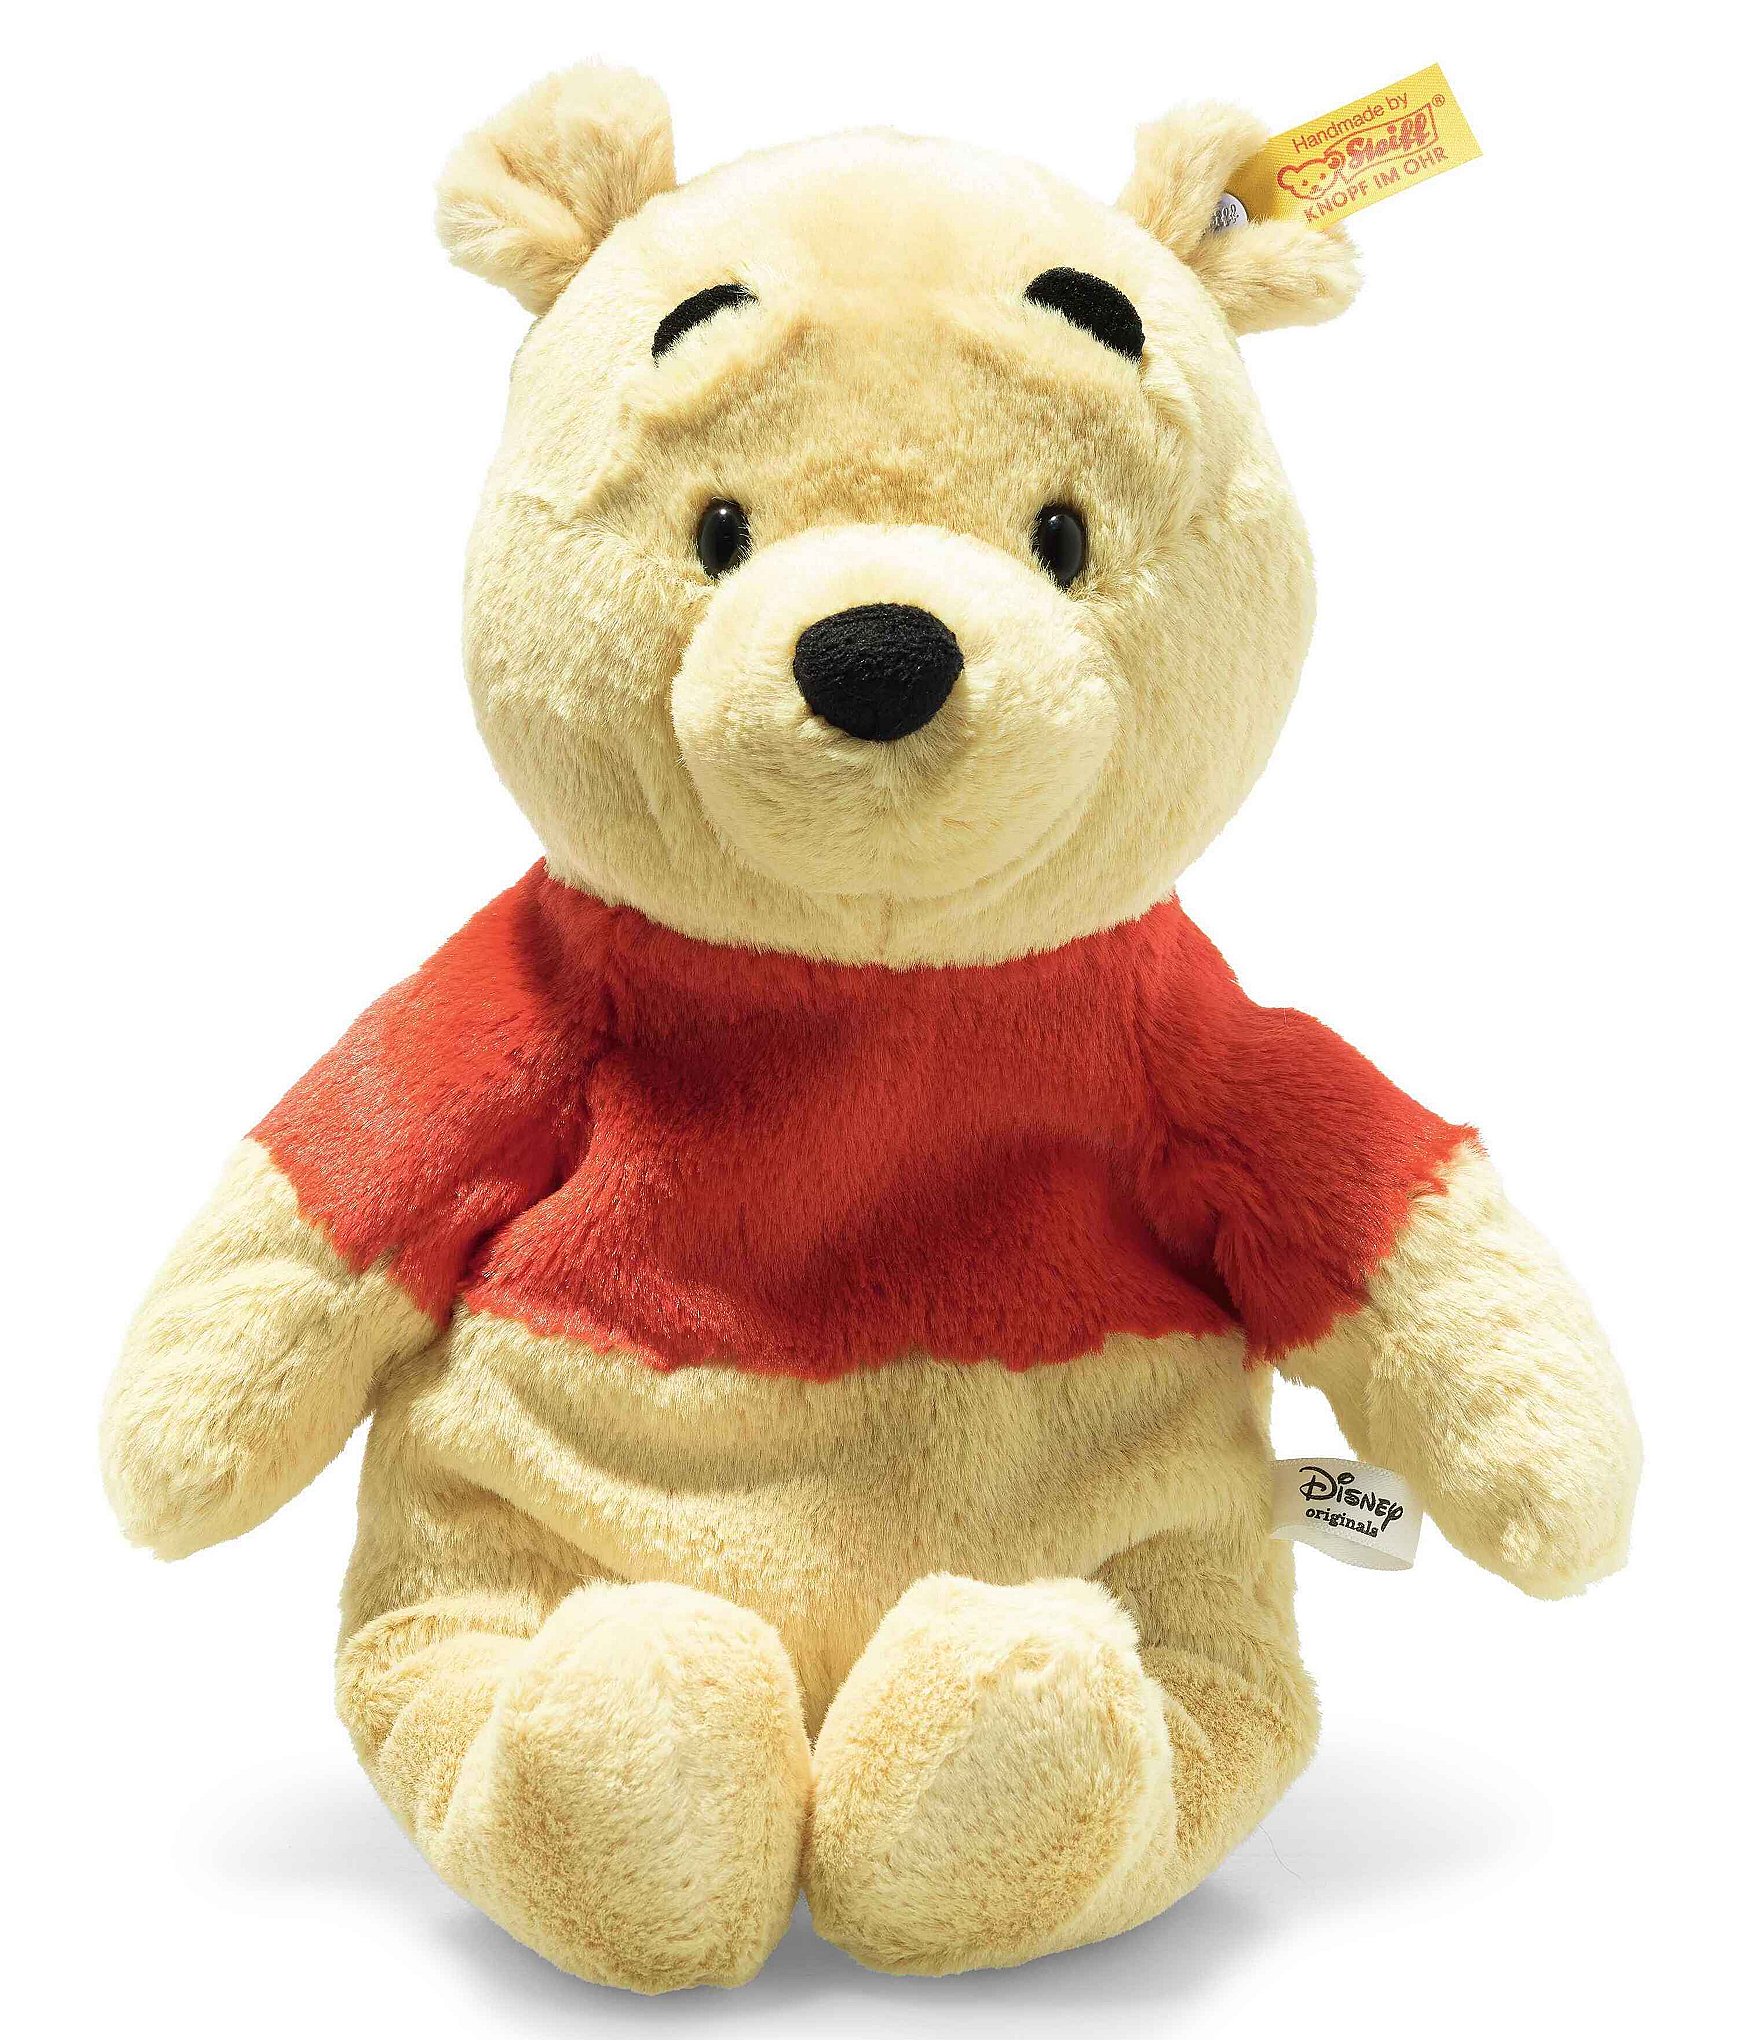 Winnie the Pooh Pooh RealBig - Officially Licensed Disney Removable Wa